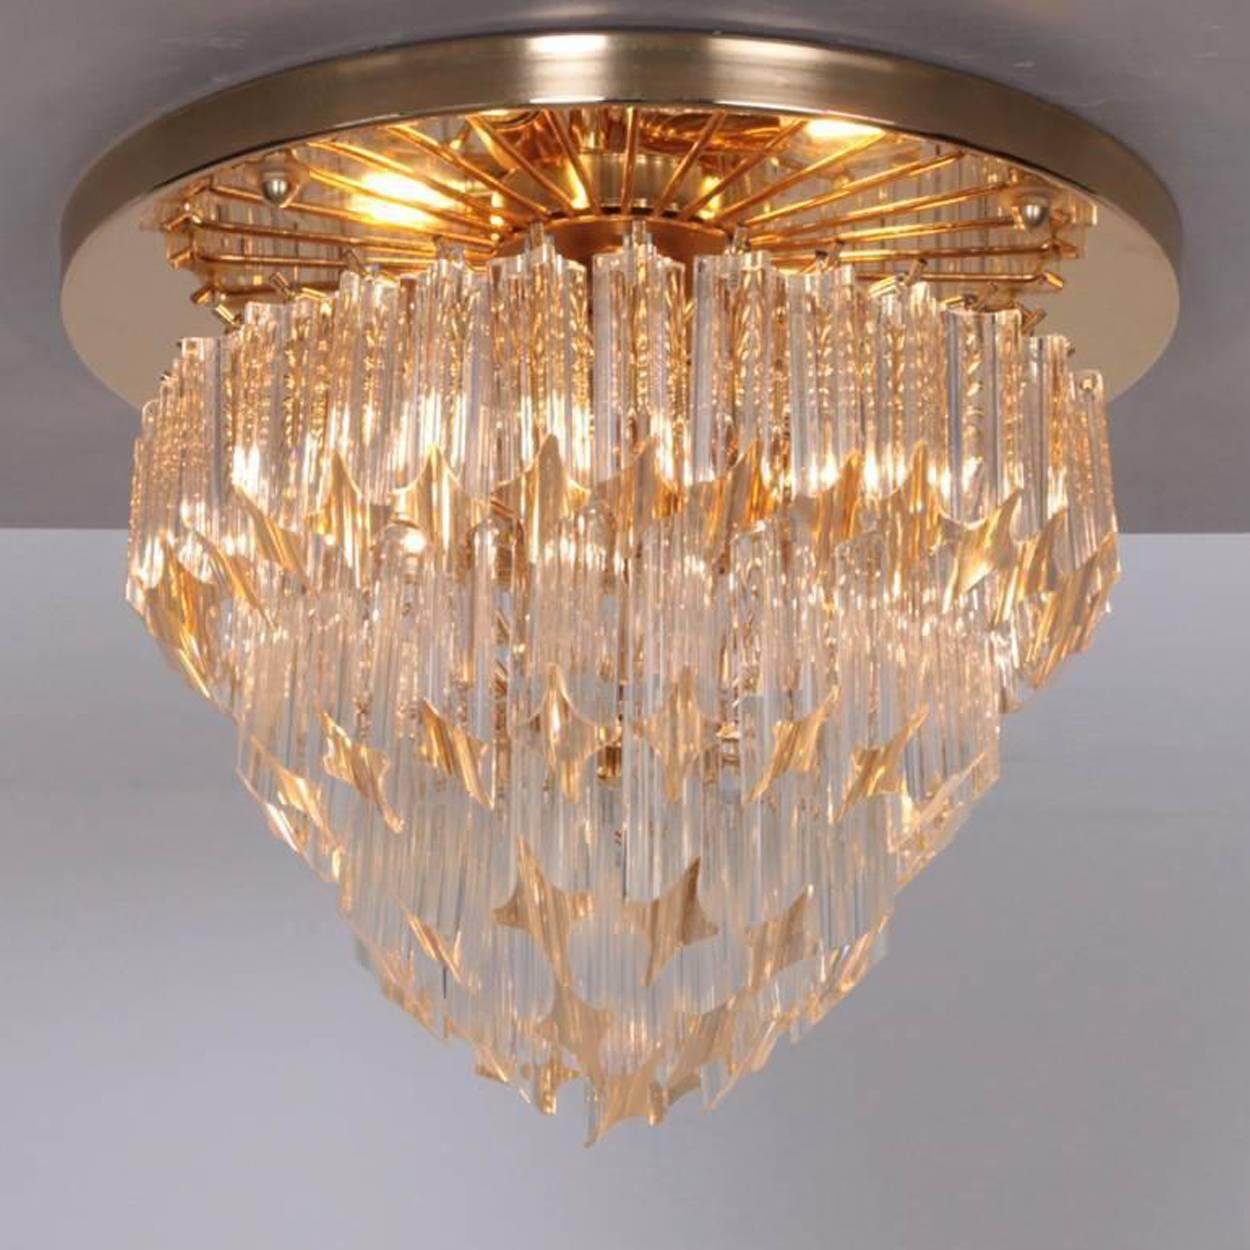 Brass Pair of Four-Tiered Venini Murano 'Astra Quadrilobo' Chandeliers, Italy, 1960 For Sale